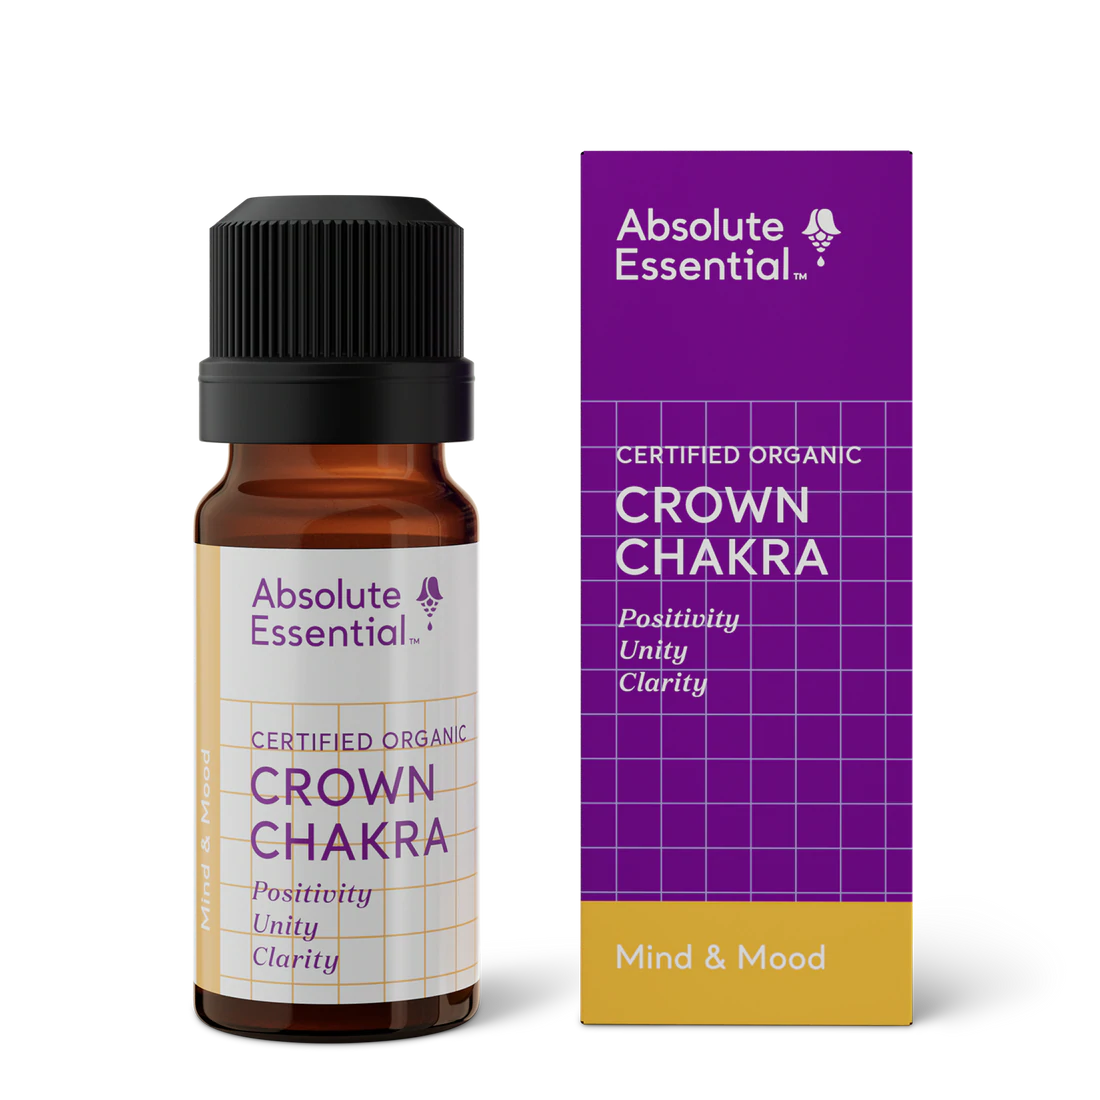 Absolute Essential Crown Chakra